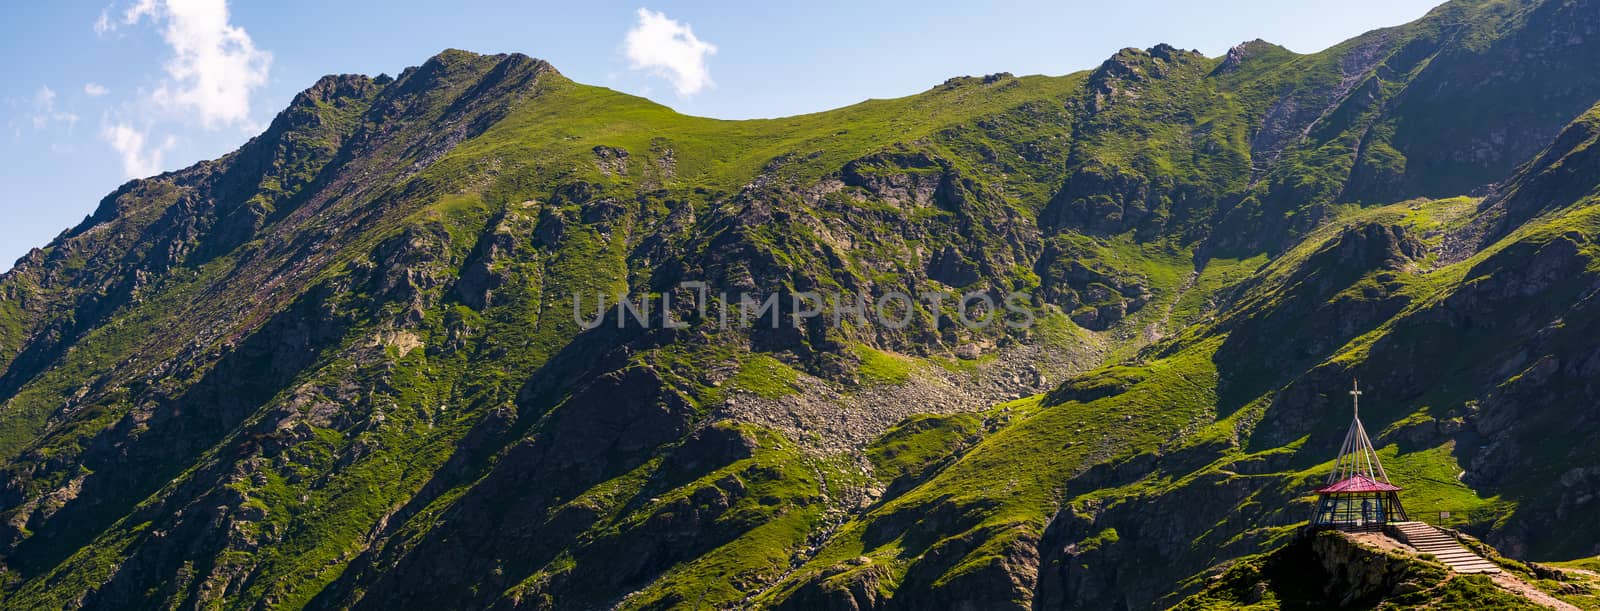 rocky mountain ridge with grassy slopes. lovely nature background